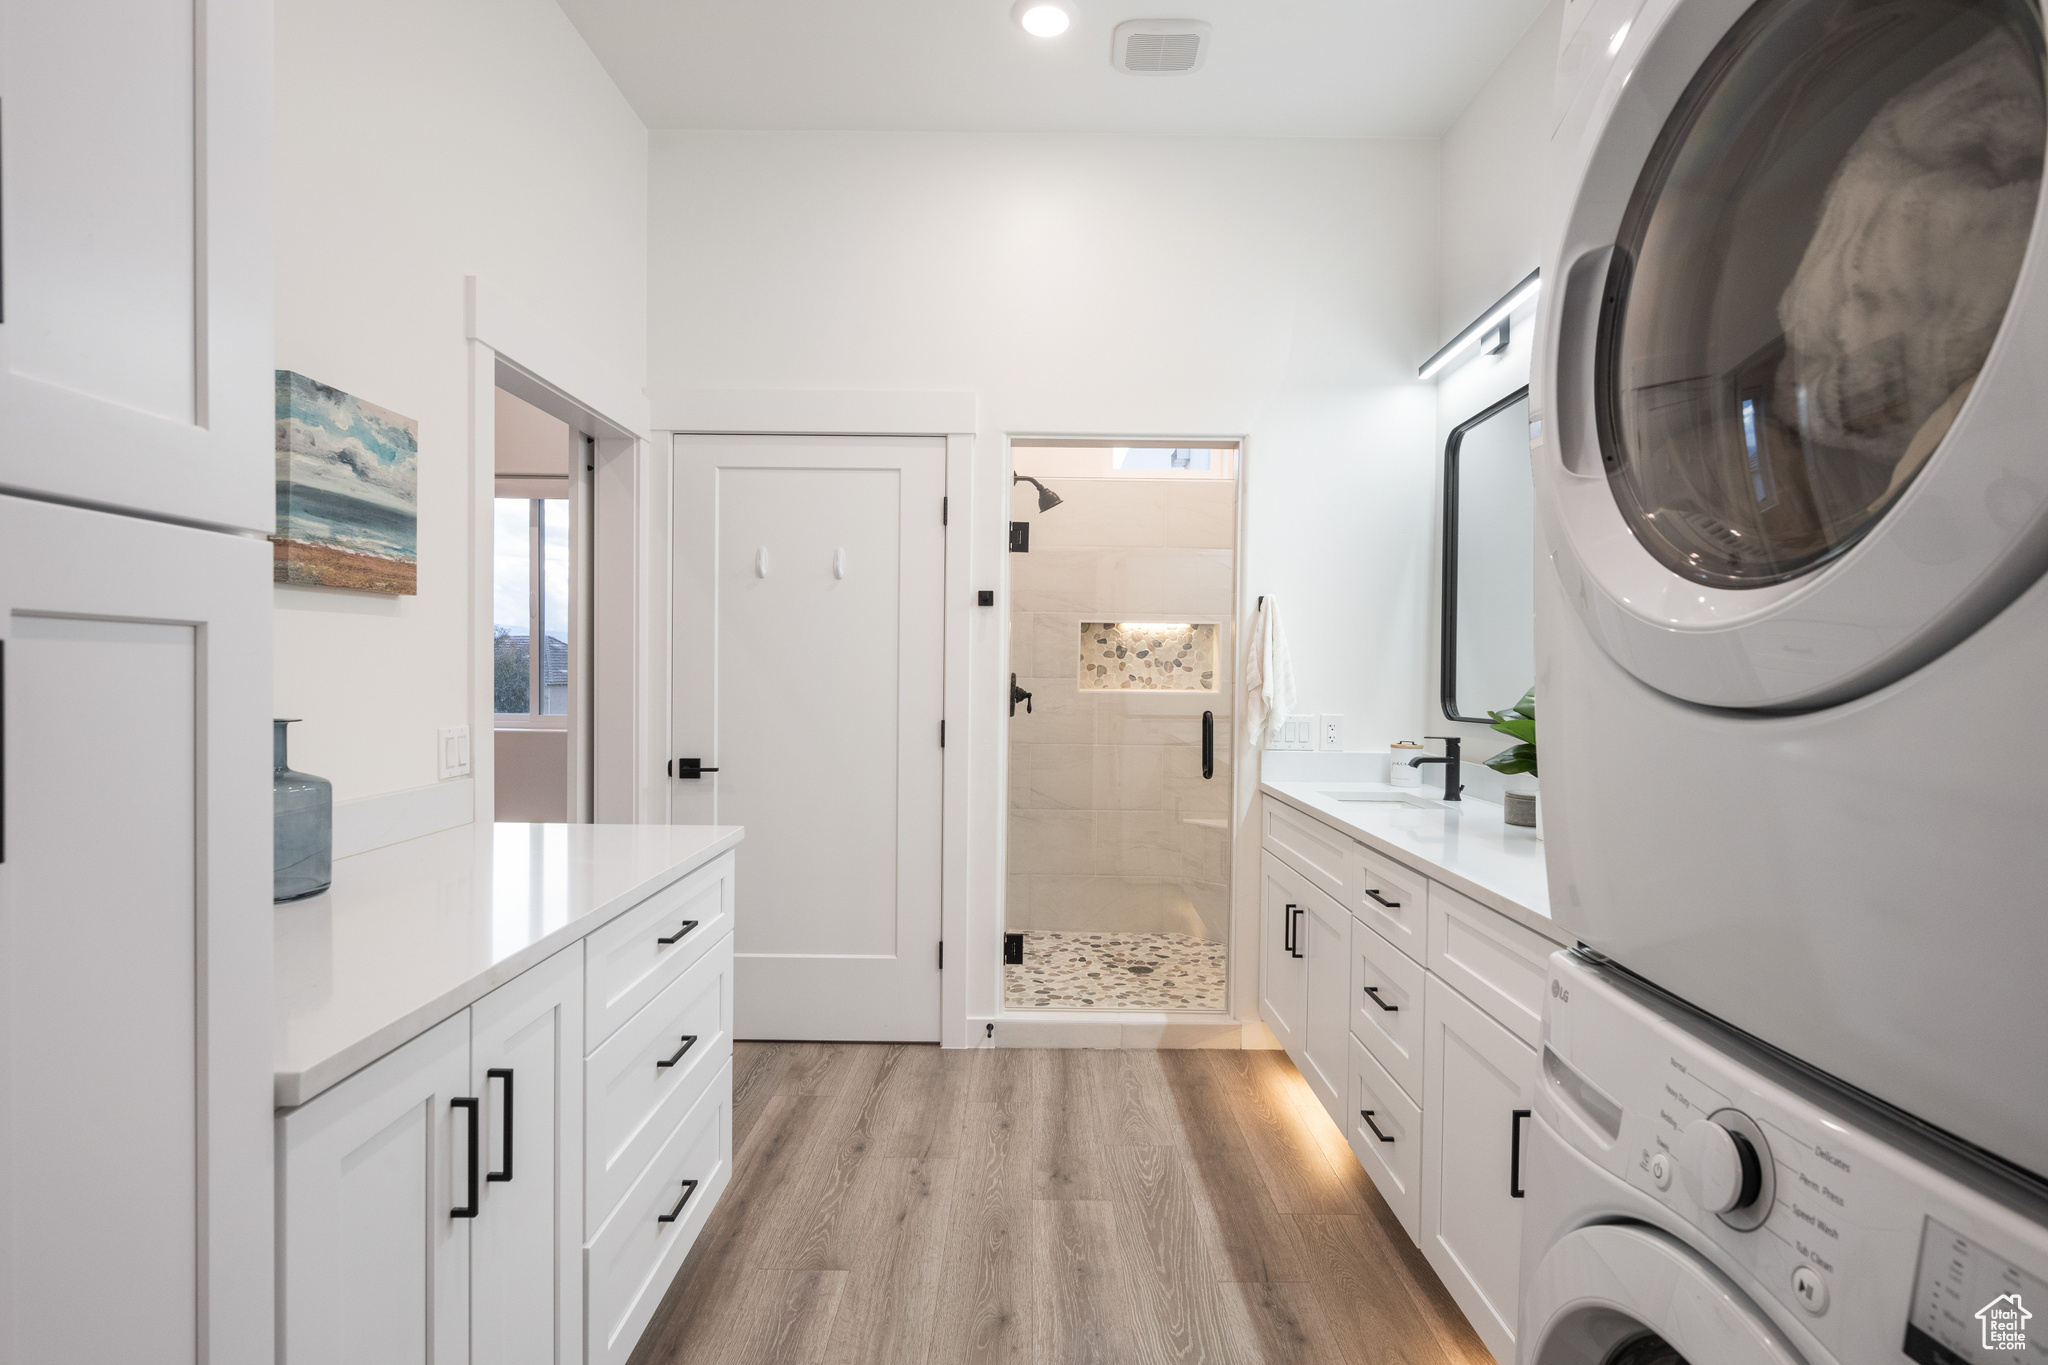 Interior space featuring vanity, a tile shower, hardwood / wood-style floors, and stacked washer / dryer